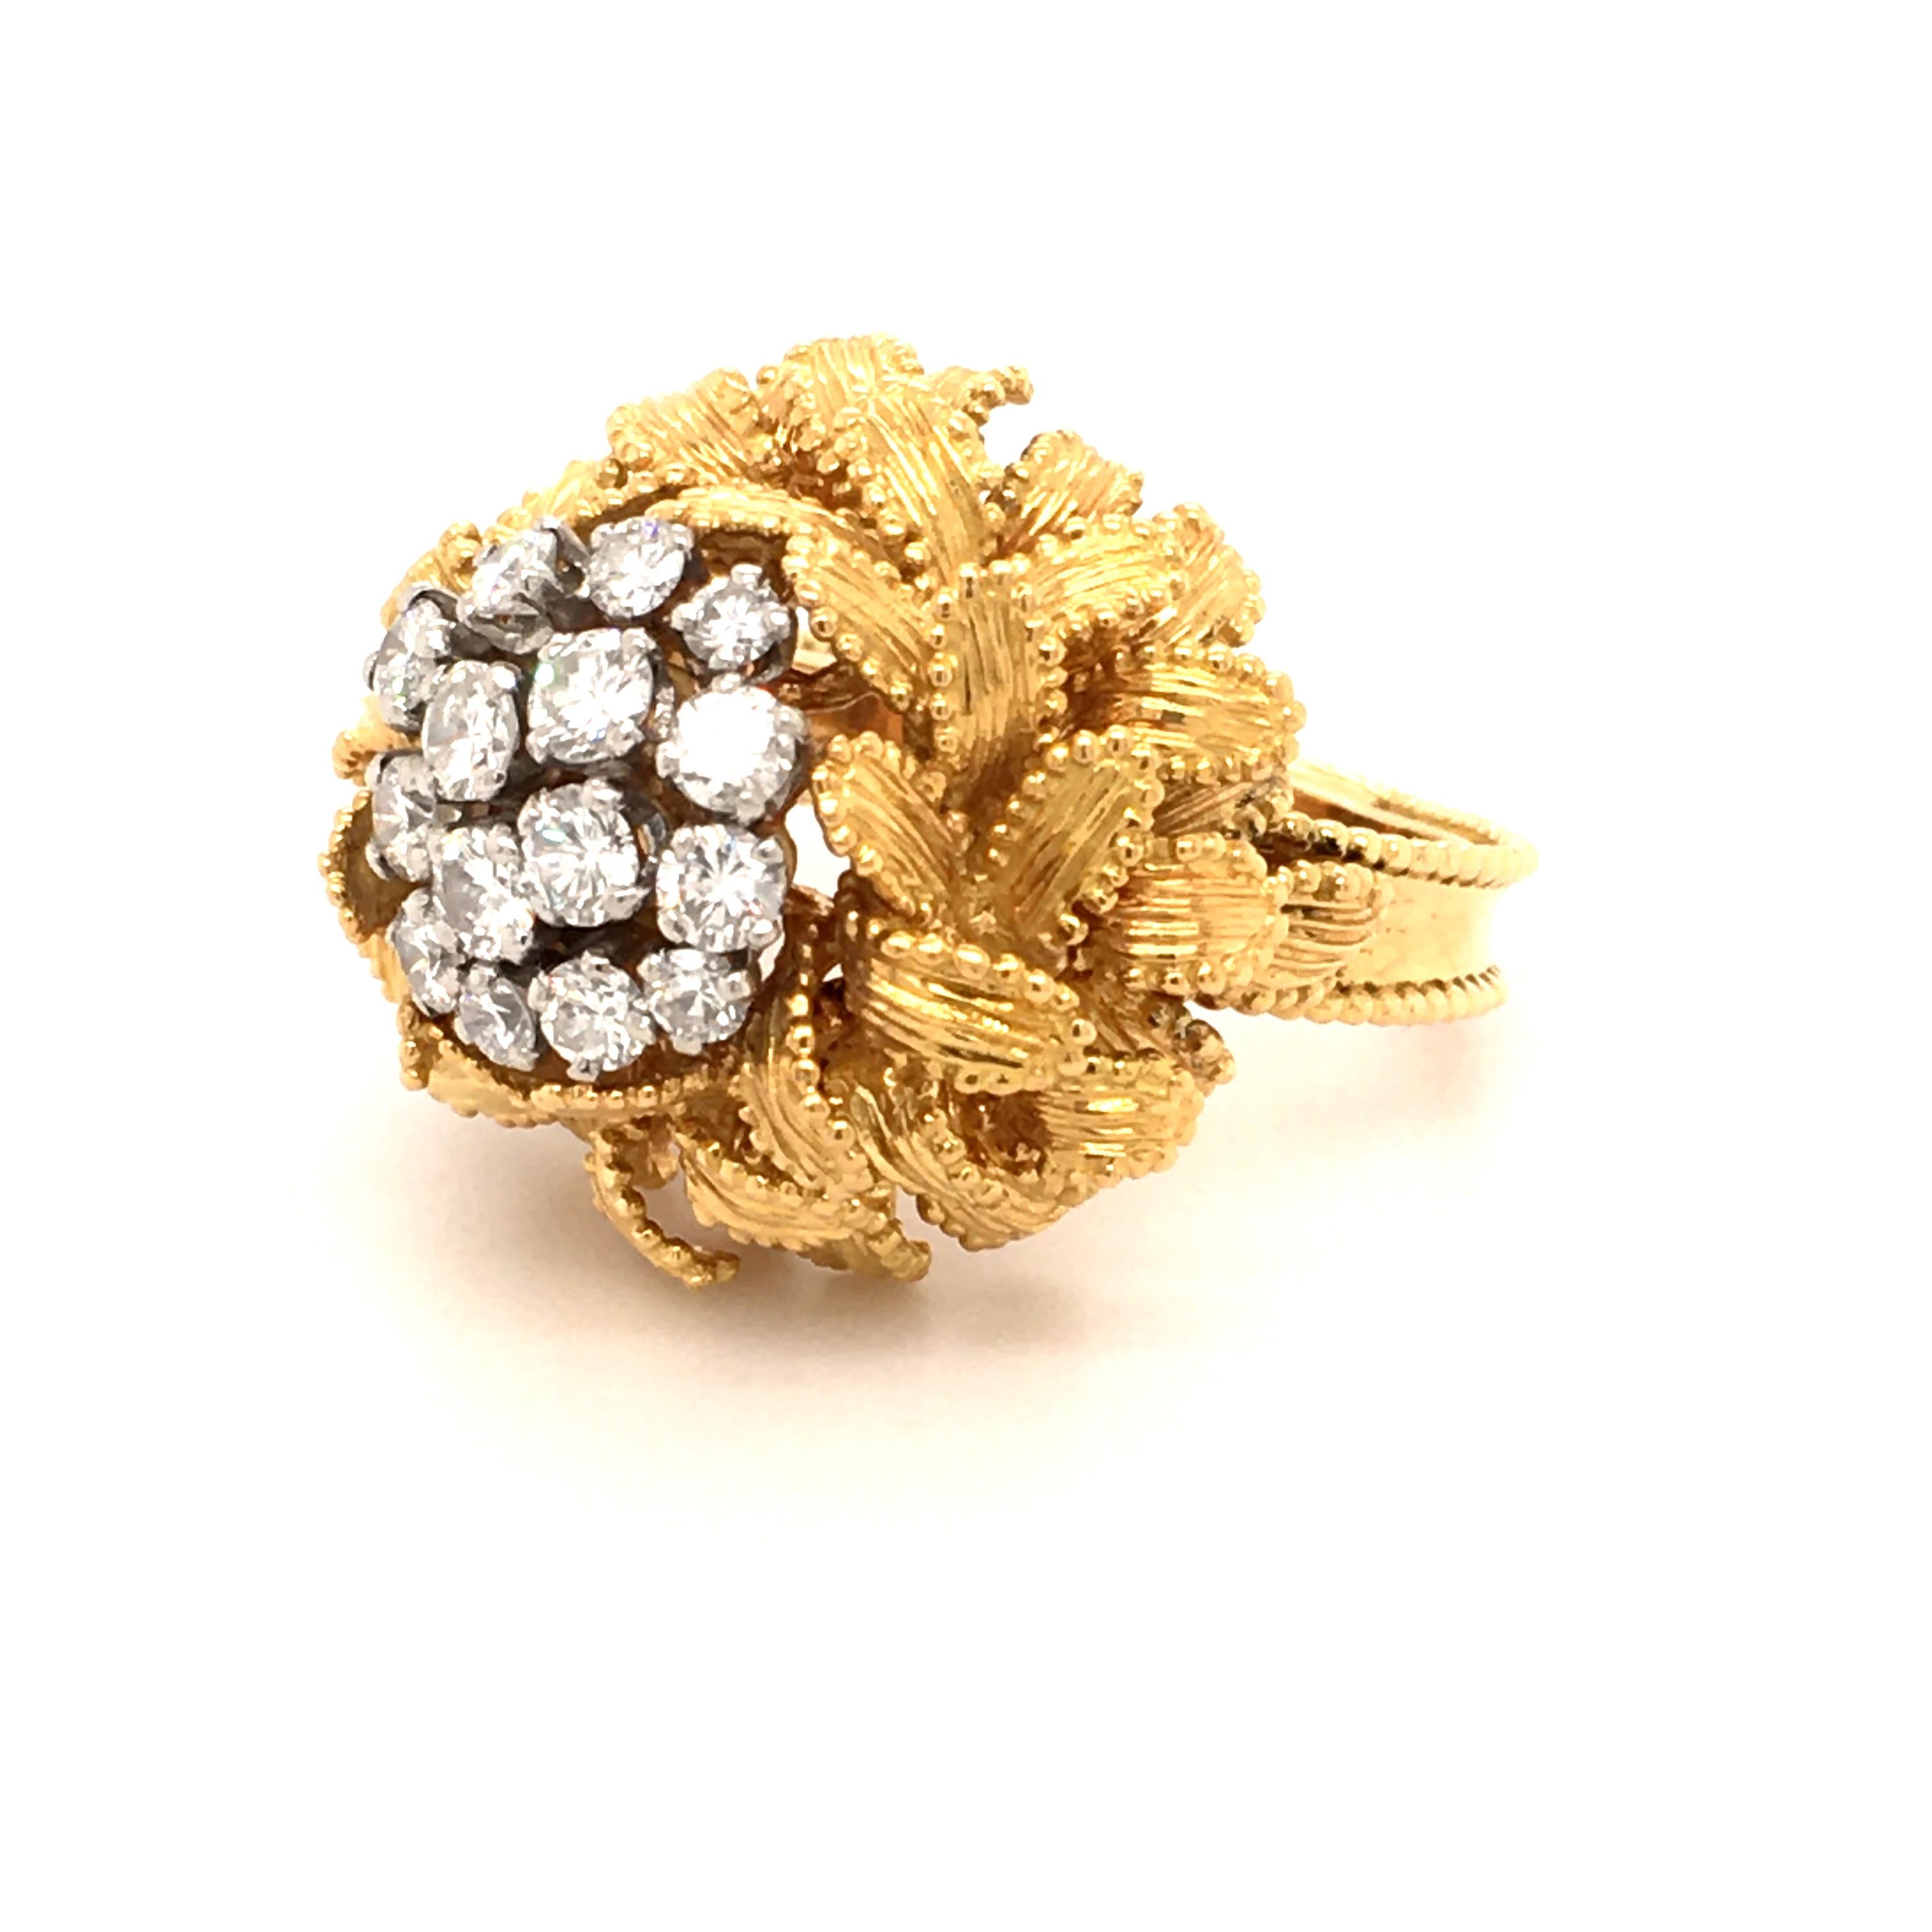 This beautifully handcrafted ring by Gubelin in 18 karat yellow and white gold is prong set with 15 brilliant cut diamonds of G/H color and vs clarity, total weight 1.06 carats. 
Each leaf is carefully bordered by minute granulated spheres.

Signed